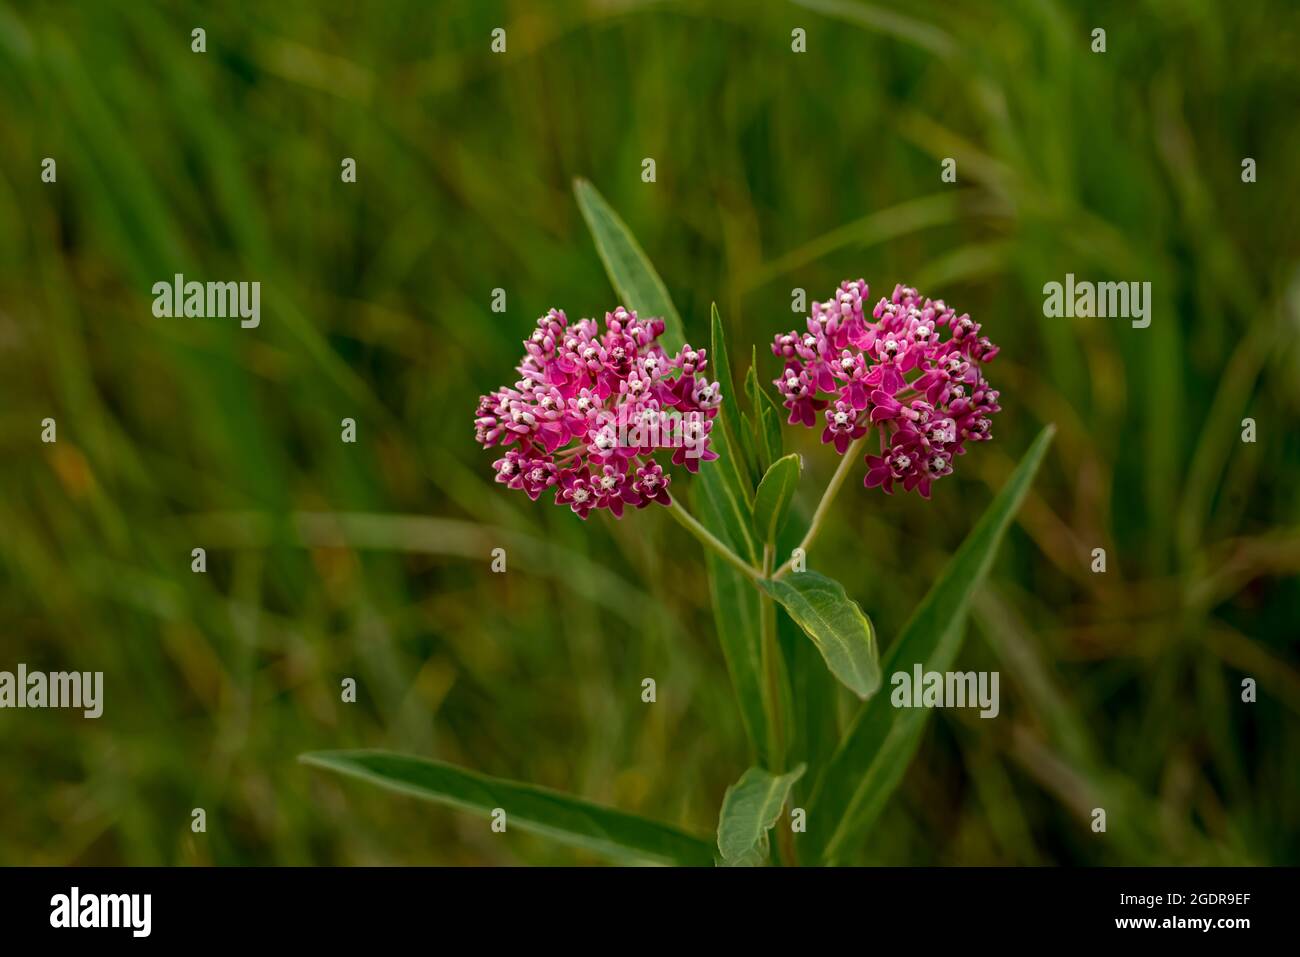 The Swamp milkweed blooming in the Tall Grass Prairie near Tolstoi, Manitoba, Canada. Stock Photo